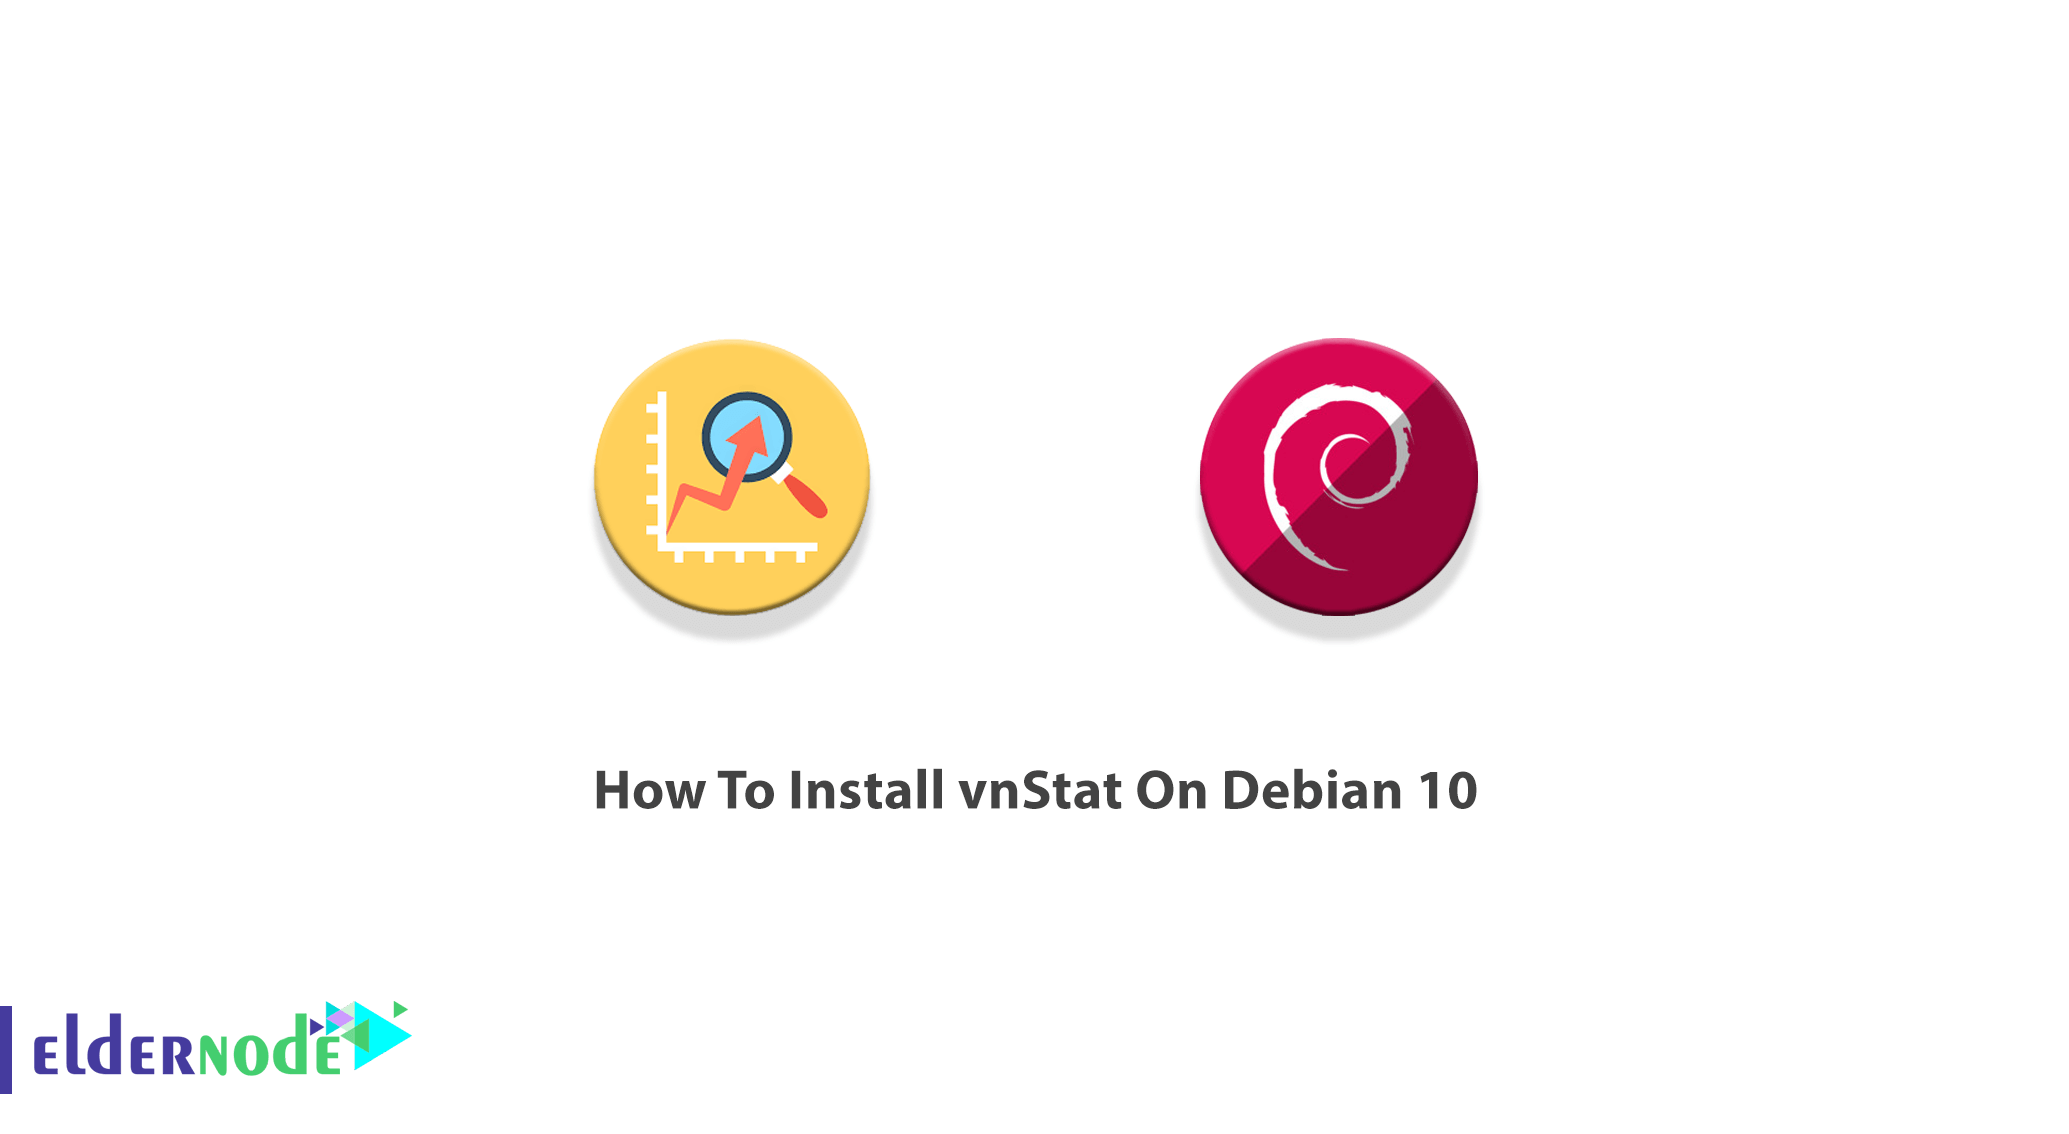 How To Install vnStat On Debian 10